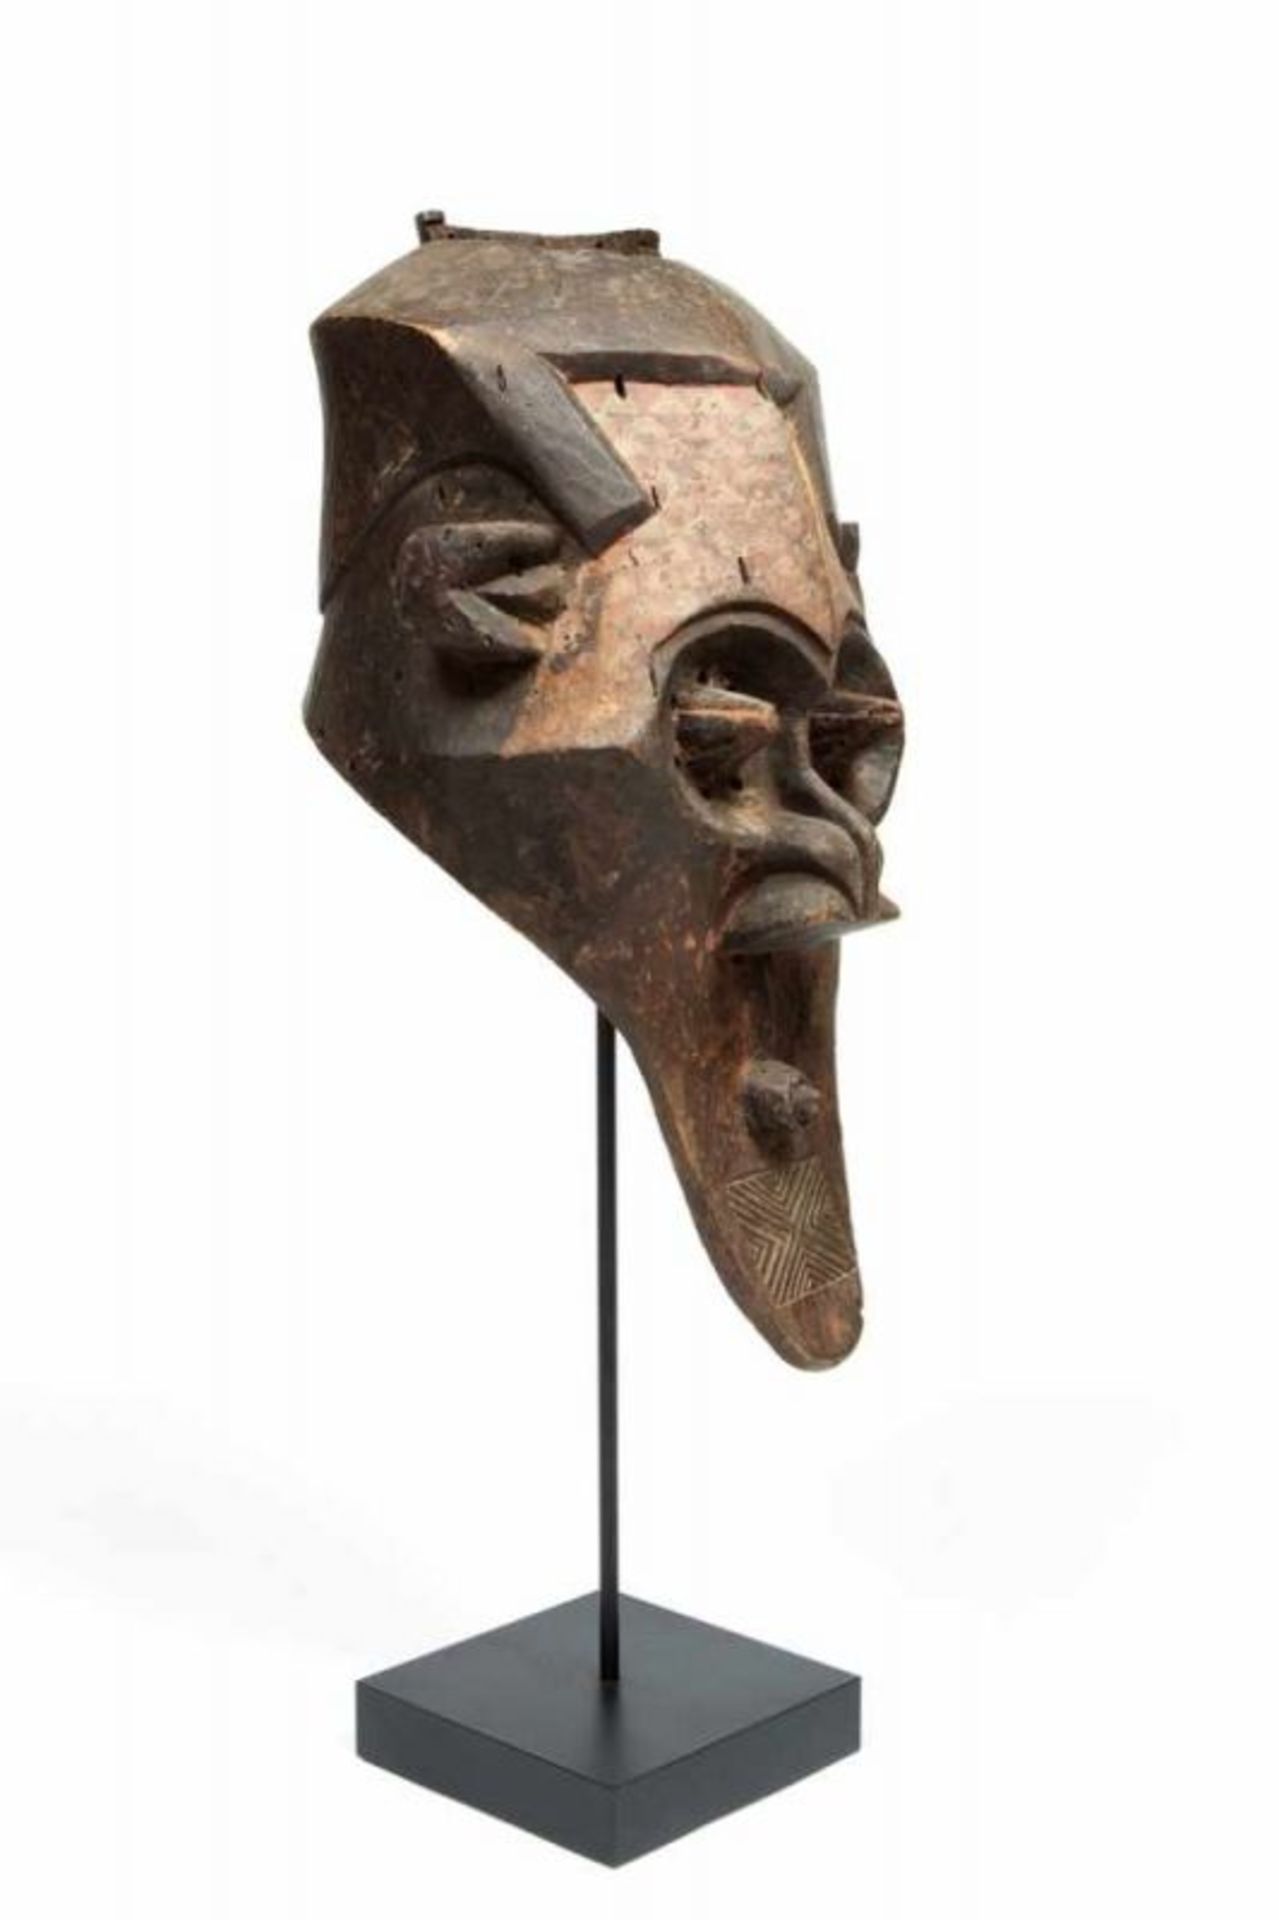 DRC., Keta, helmet mask, kabongo,with pointy pupils, protruding mouth, ears and triangular nose.